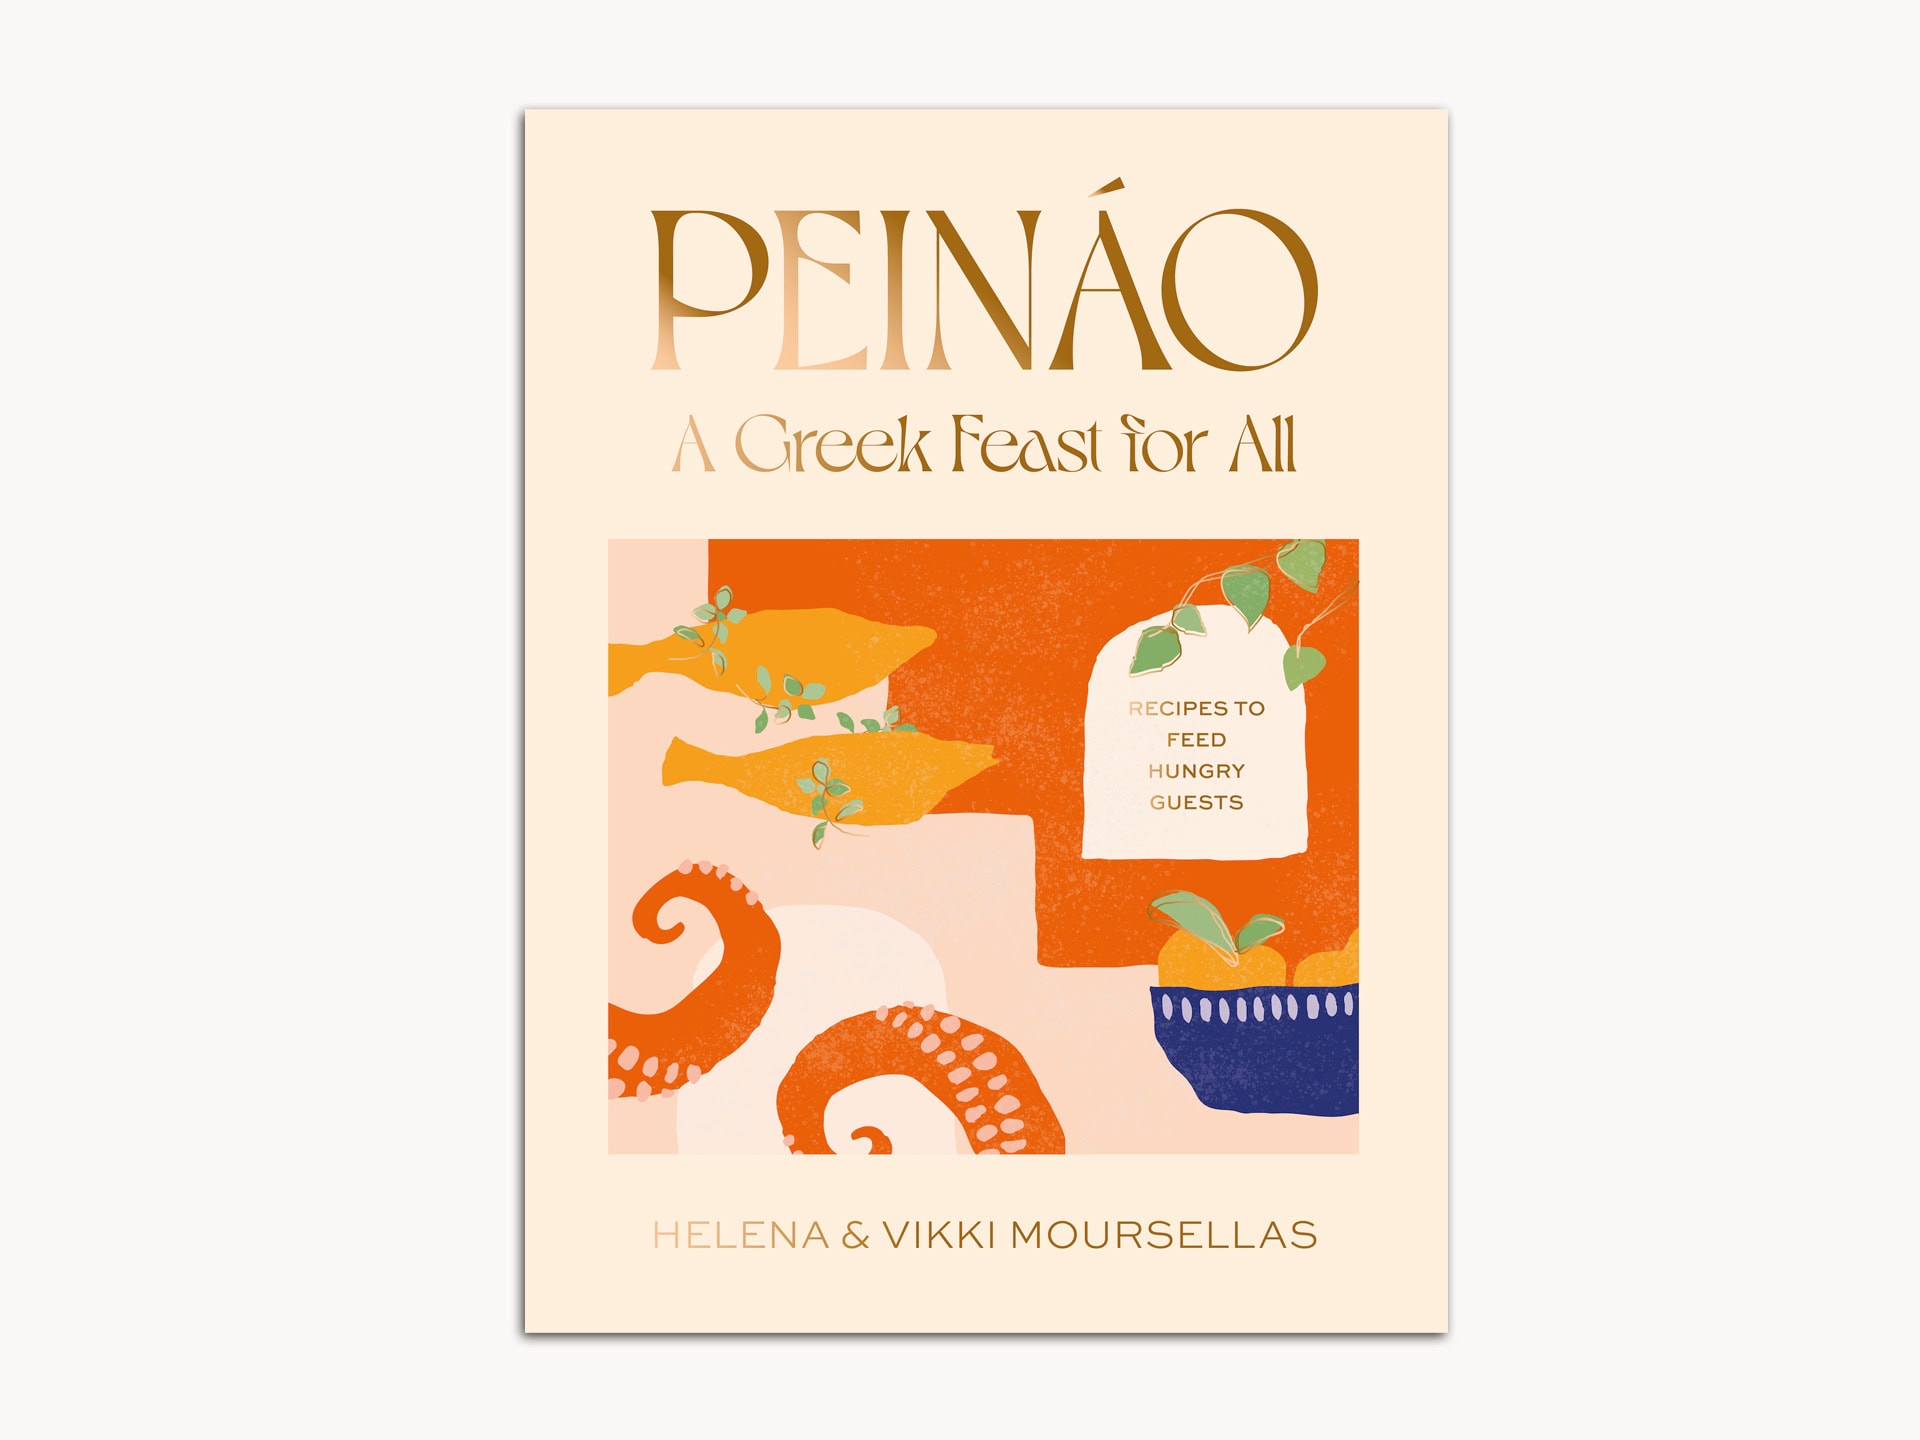 Peinao: A Greek Feast for All